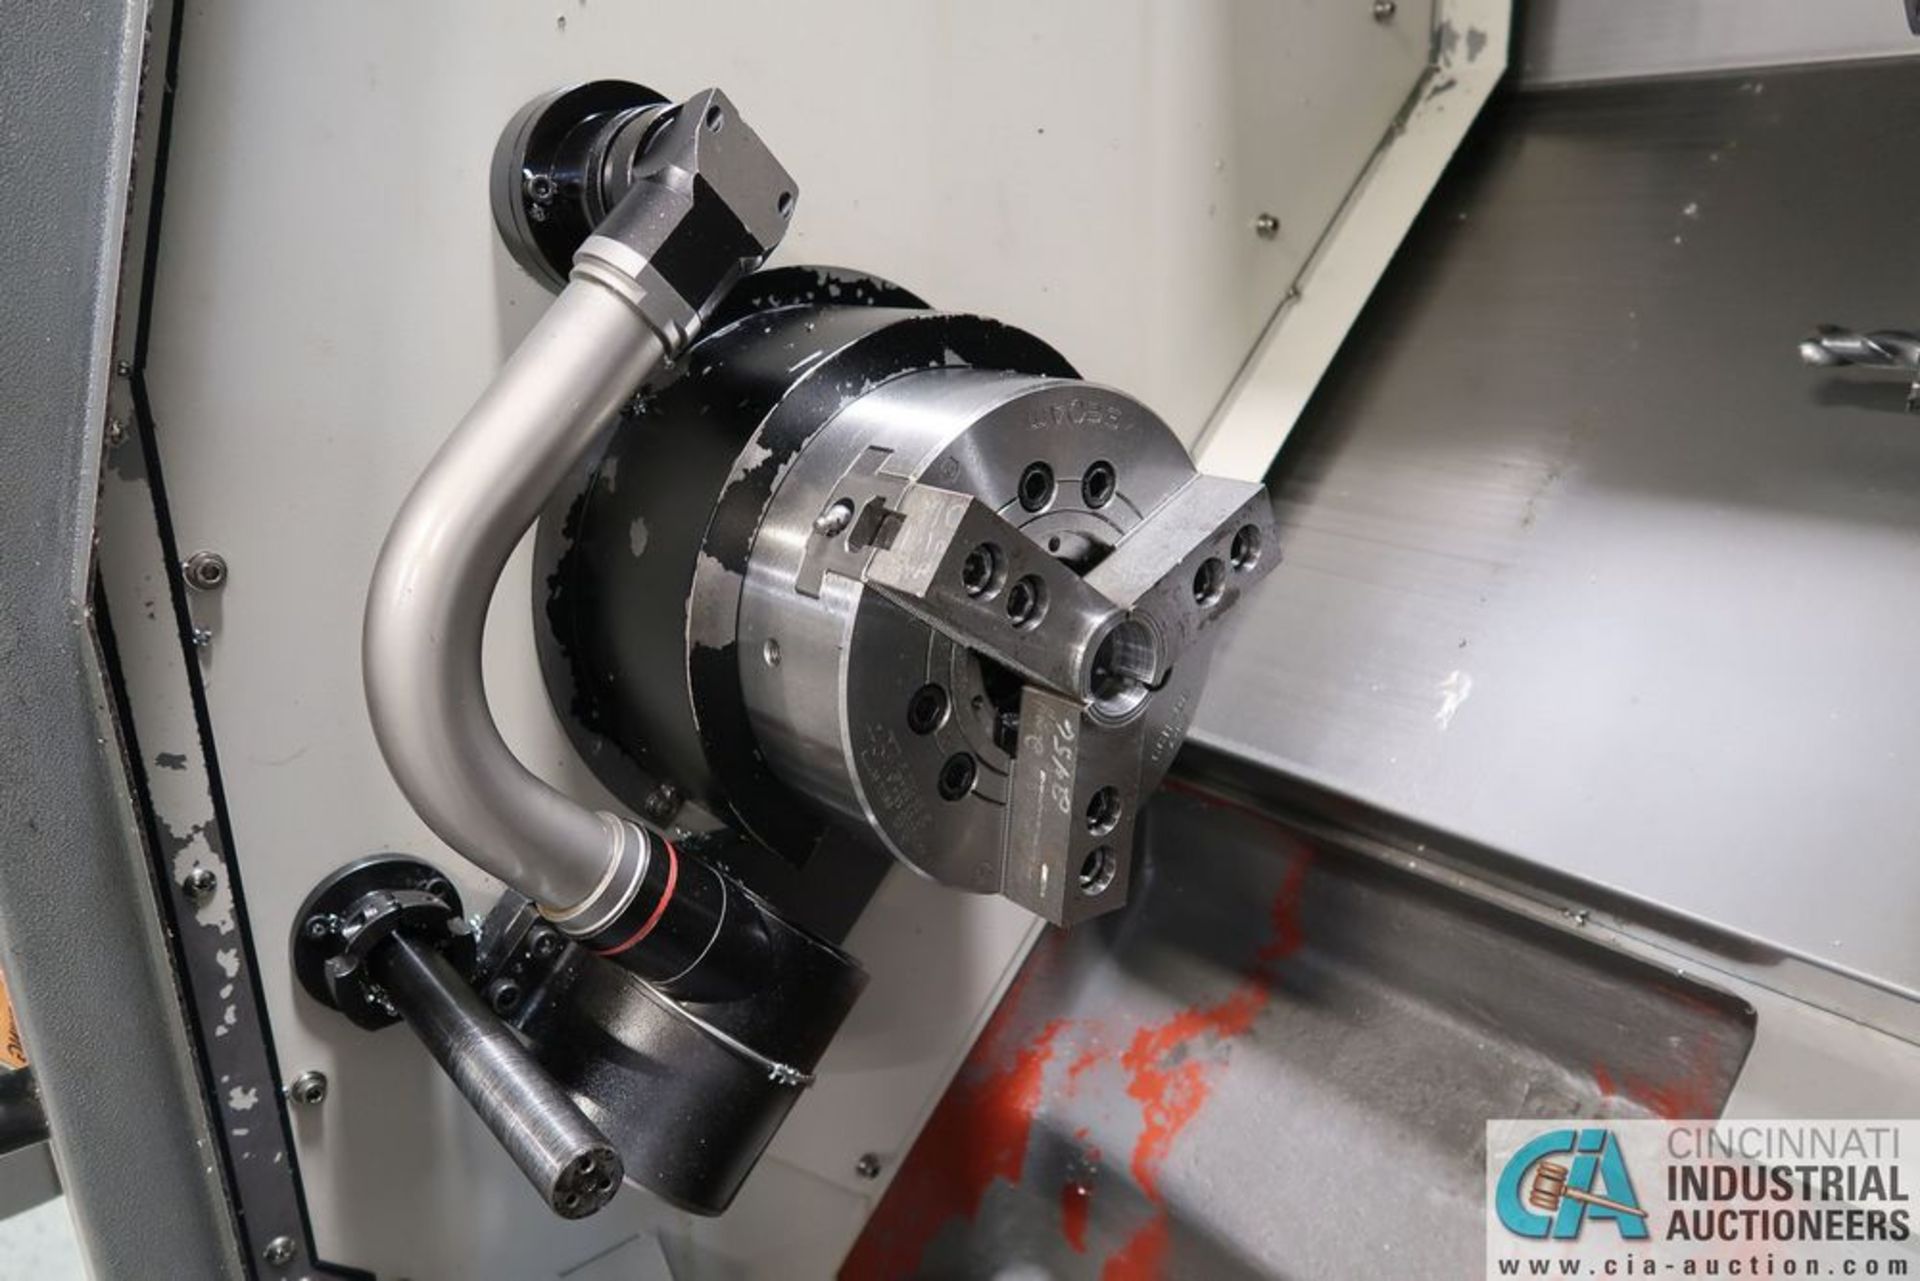 SAMSUNG SL20/500 CNC TURNING CENTER; S/N 12H440853, 8" 3-JAW CHUCK, **Rigging Fee Due $500.00** - Image 7 of 14